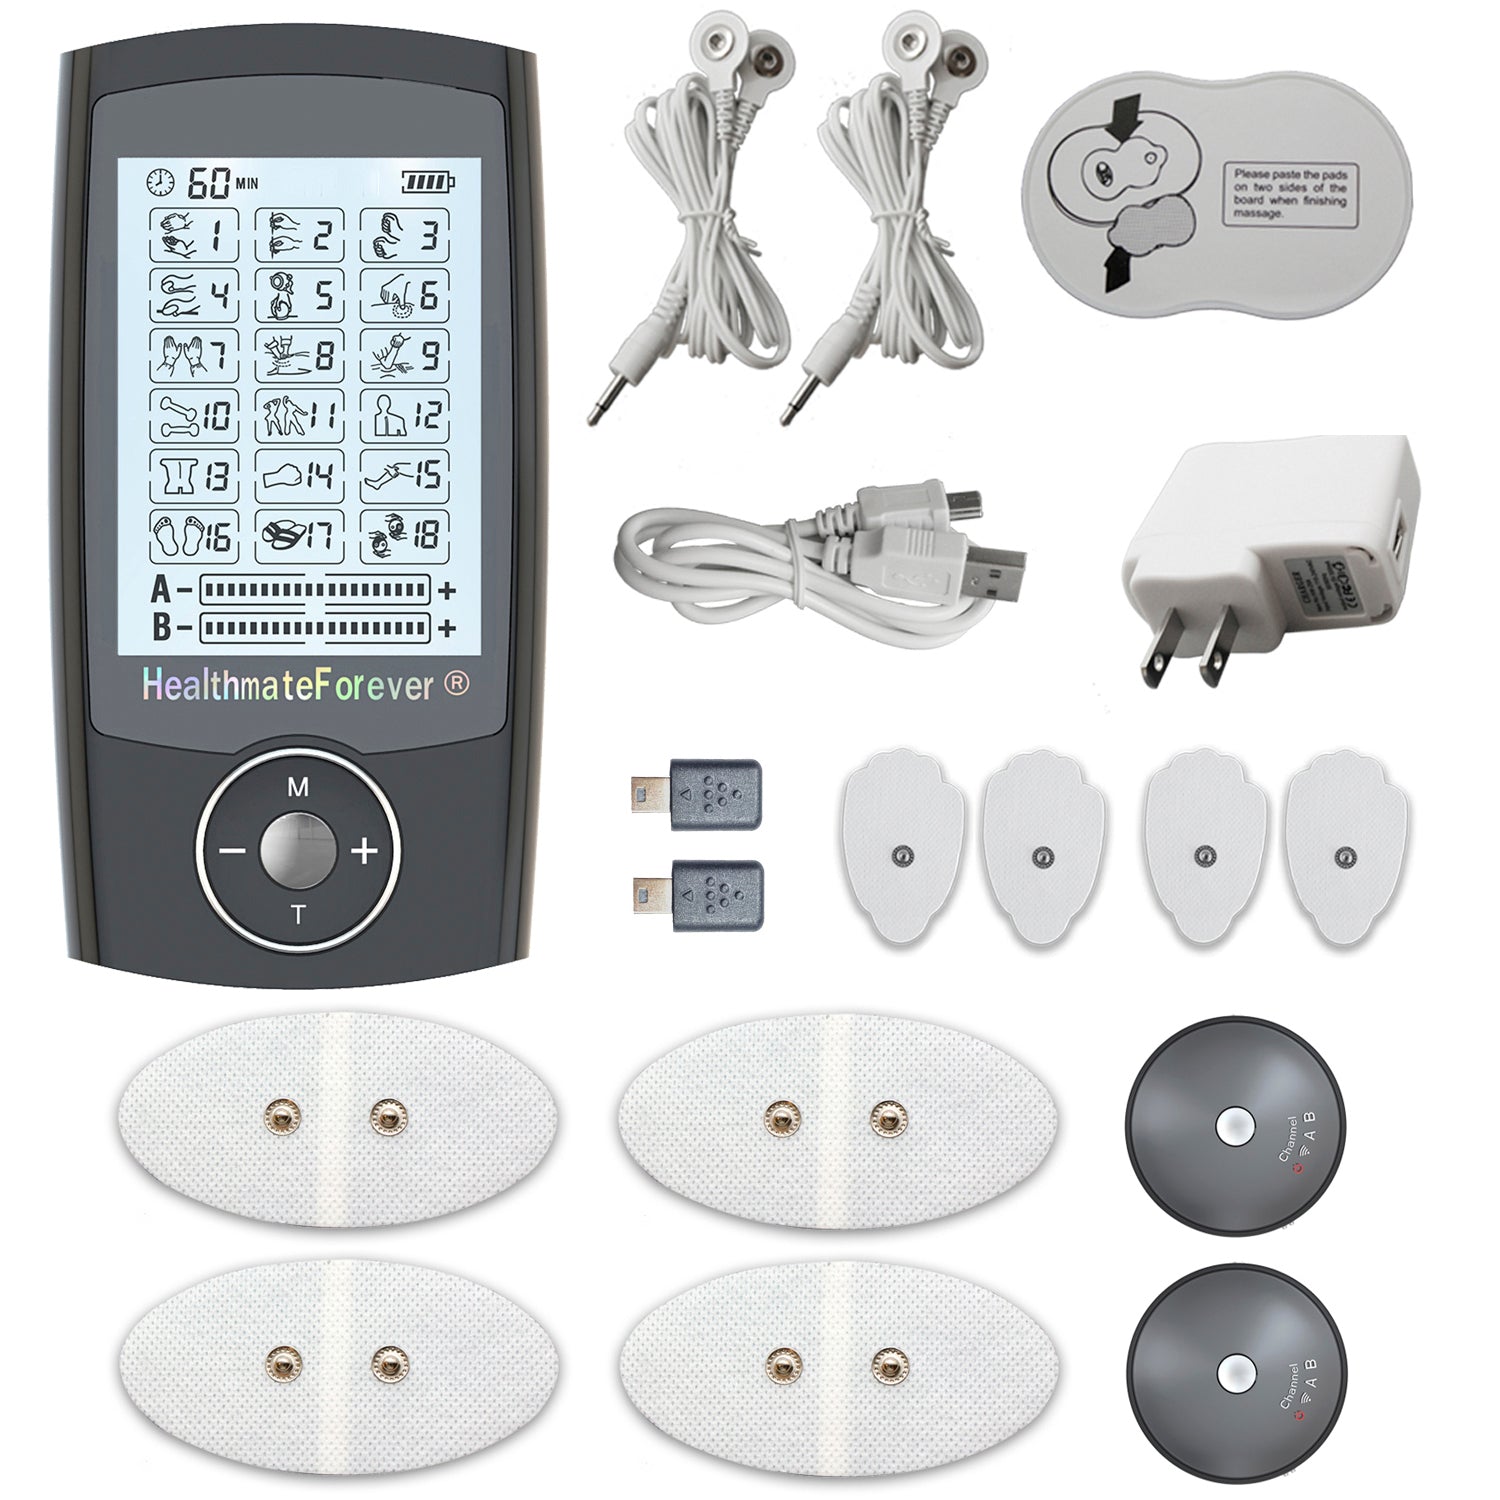 HealthmateForever Therapeutic Solutions FDA Pain Relief TENS UNIT Tested  Working